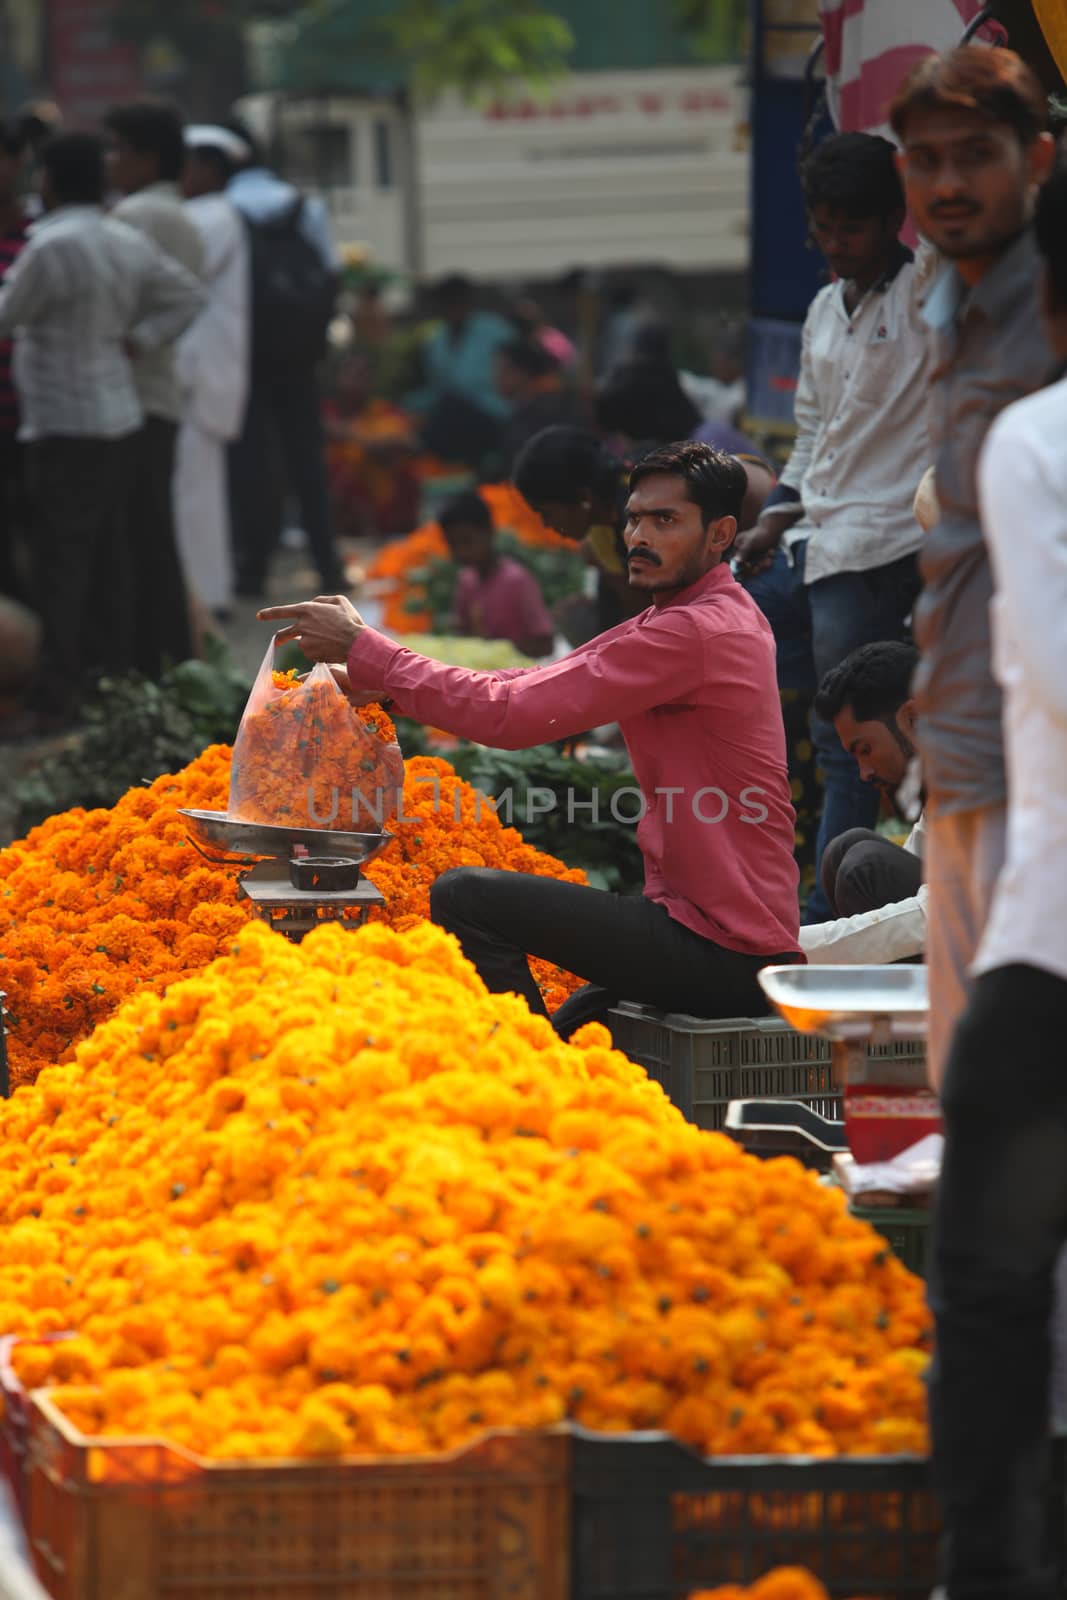 Pune, India - October 21, 2015: A seller weighing a bag of marigold flowers before selling it in his streetside shop, on the eve of Dassera festival in India